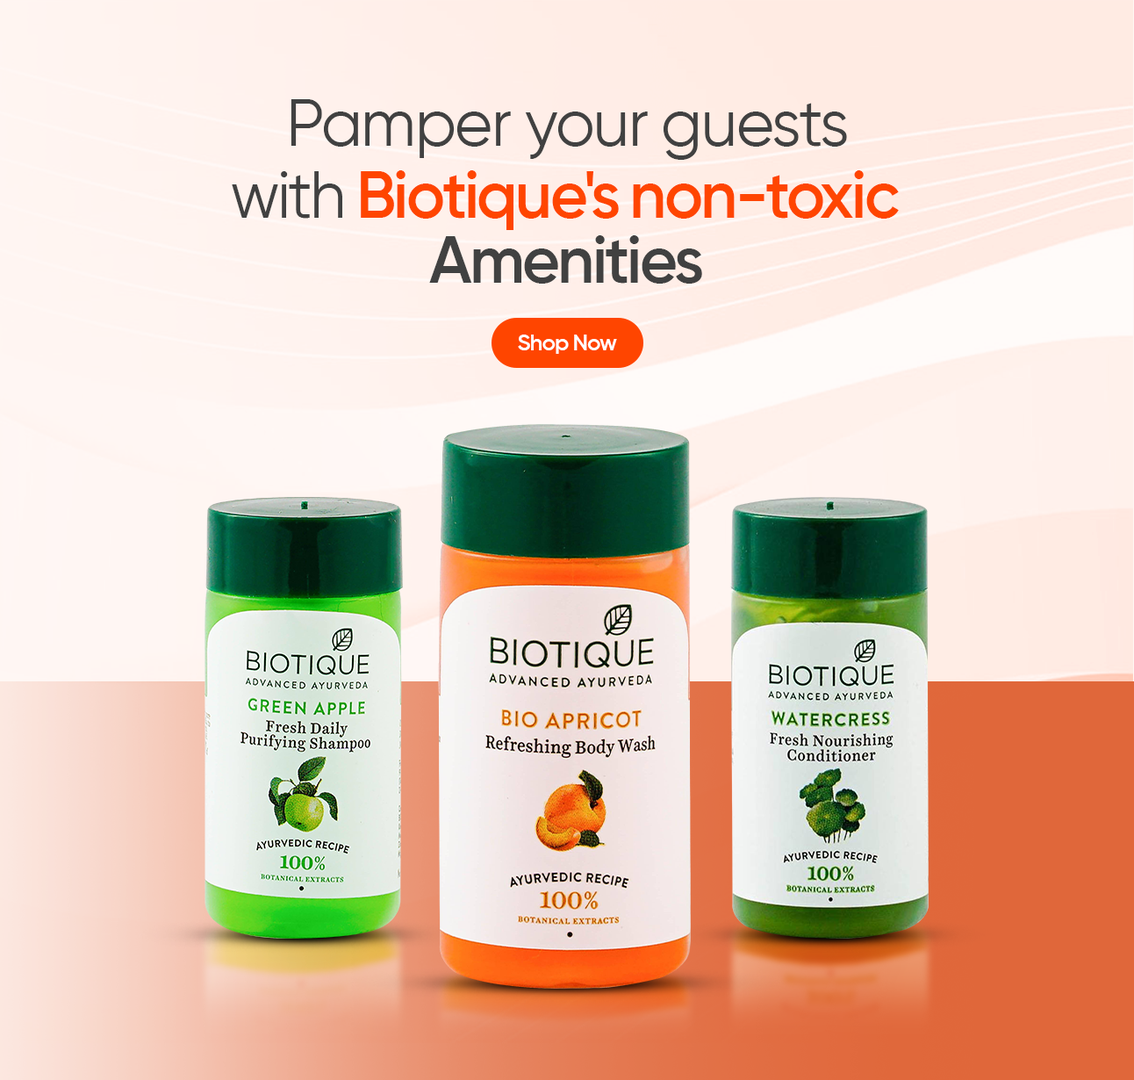 Biotique all-natural, non-toxic hotel amenities for guests